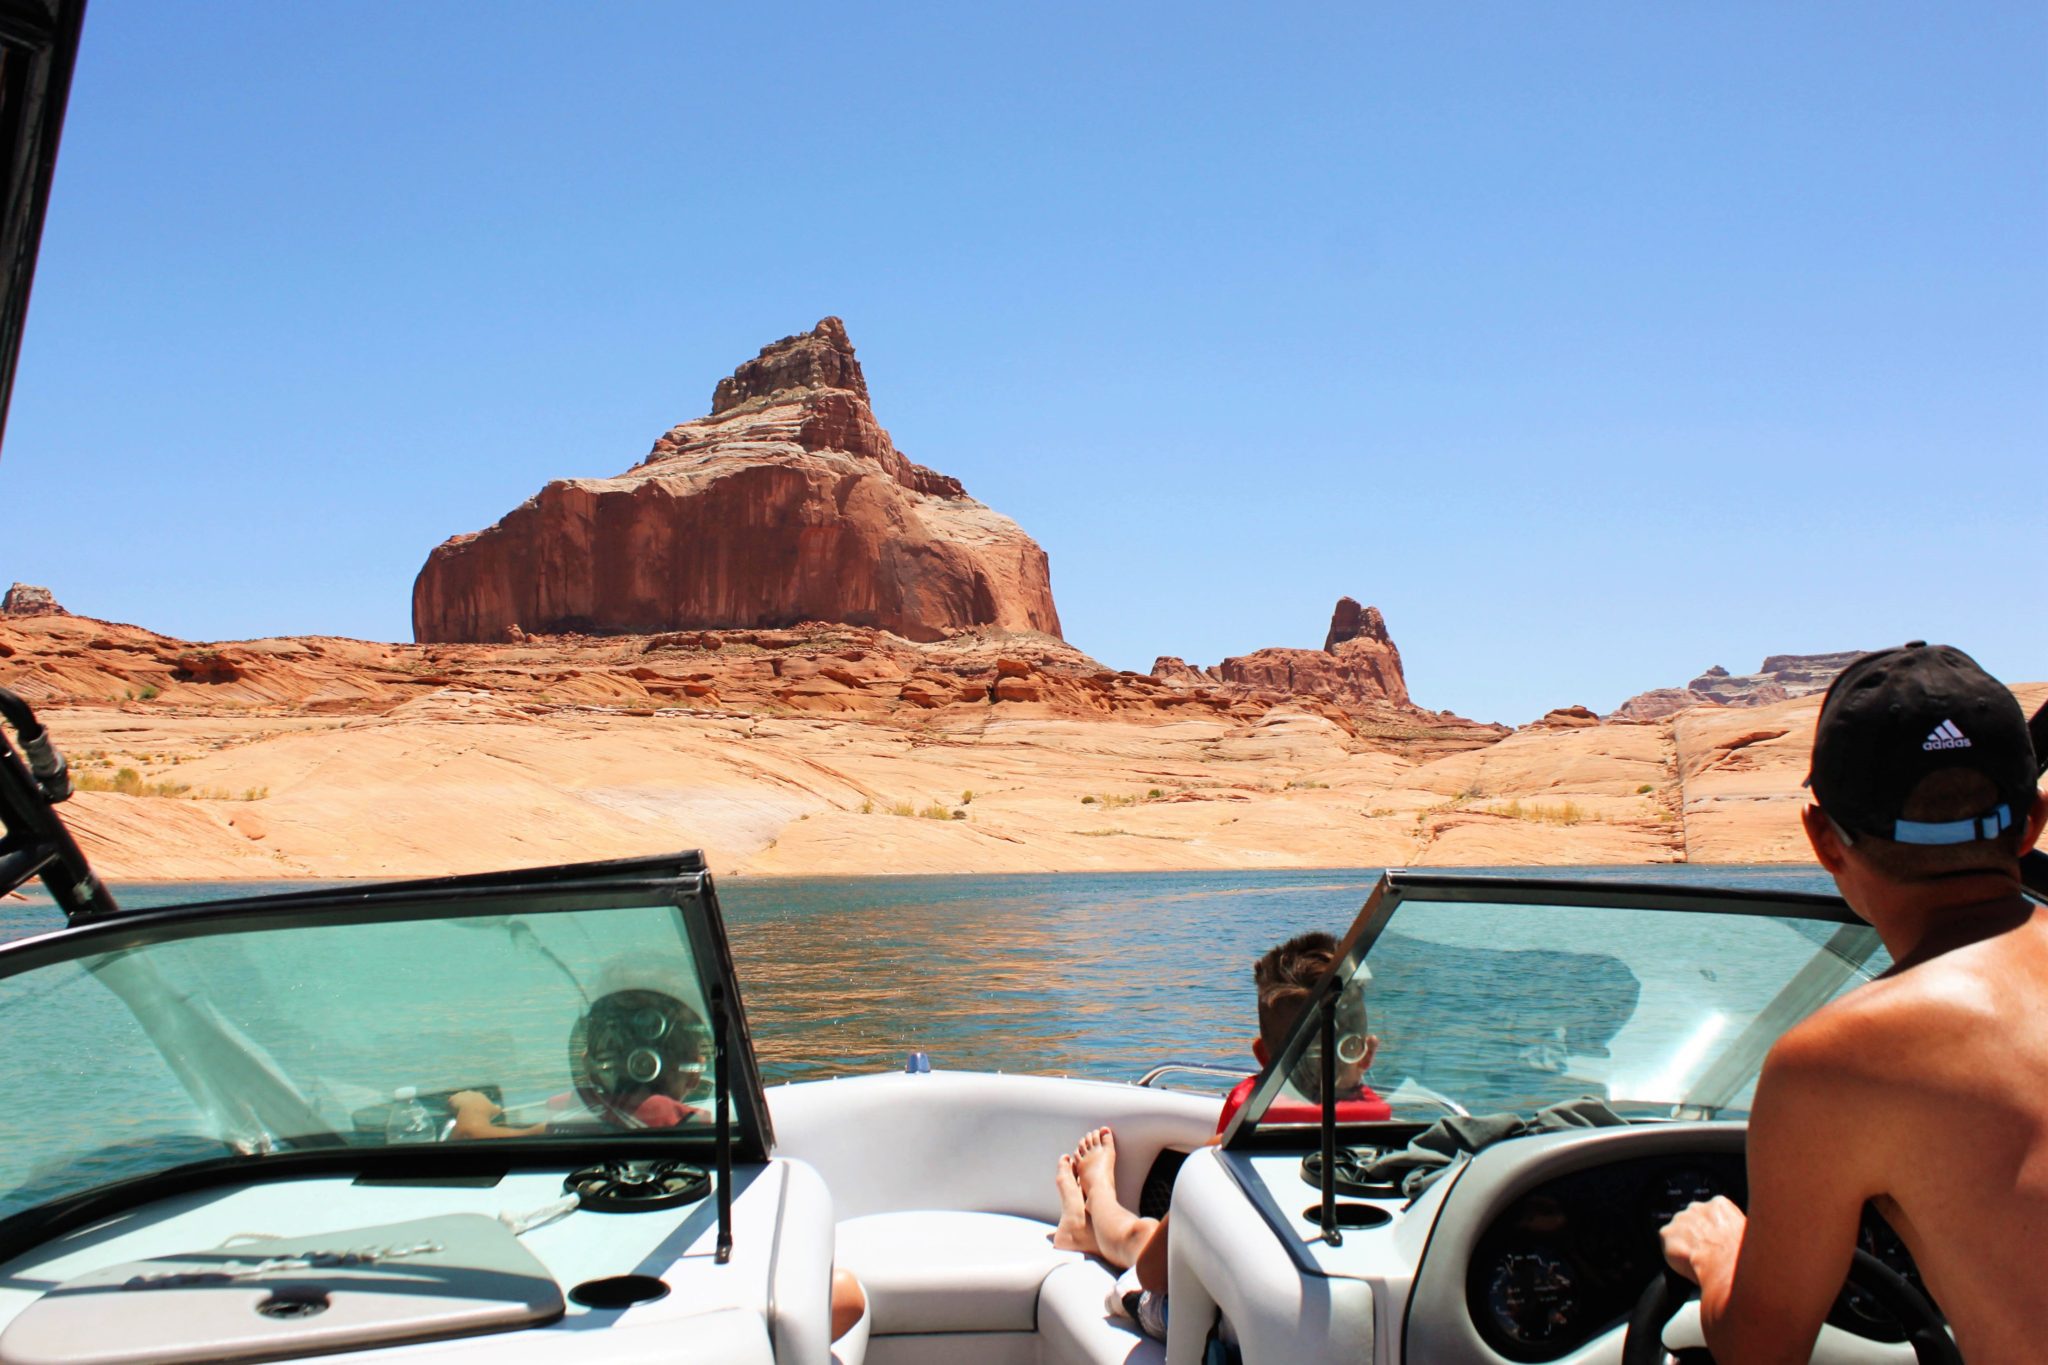 How to get to the Labyrinth Slot Canyons at Lake Powell- Lake Powell boating guide #lakepowell #arizona #utah #boating #simplywander